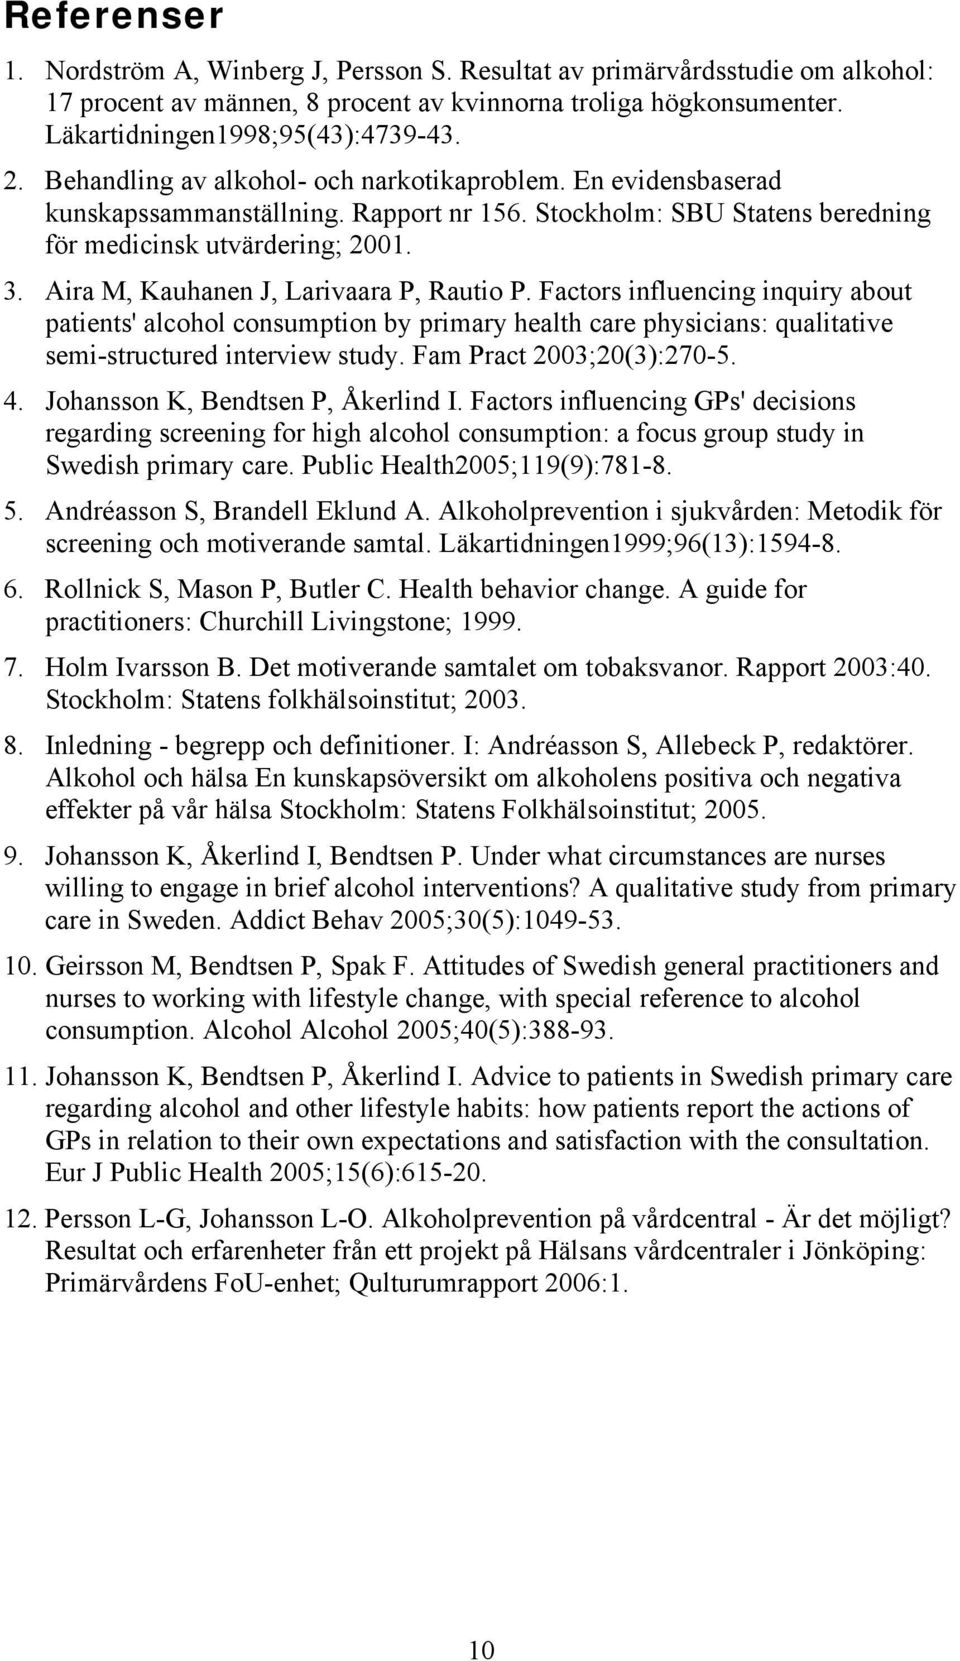 Aira M, Kauhanen J, Larivaara P, Rautio P. Factors influencing inquiry about patients' alcohol consumption by primary health care physicians: qualitative semi-structured interview study.